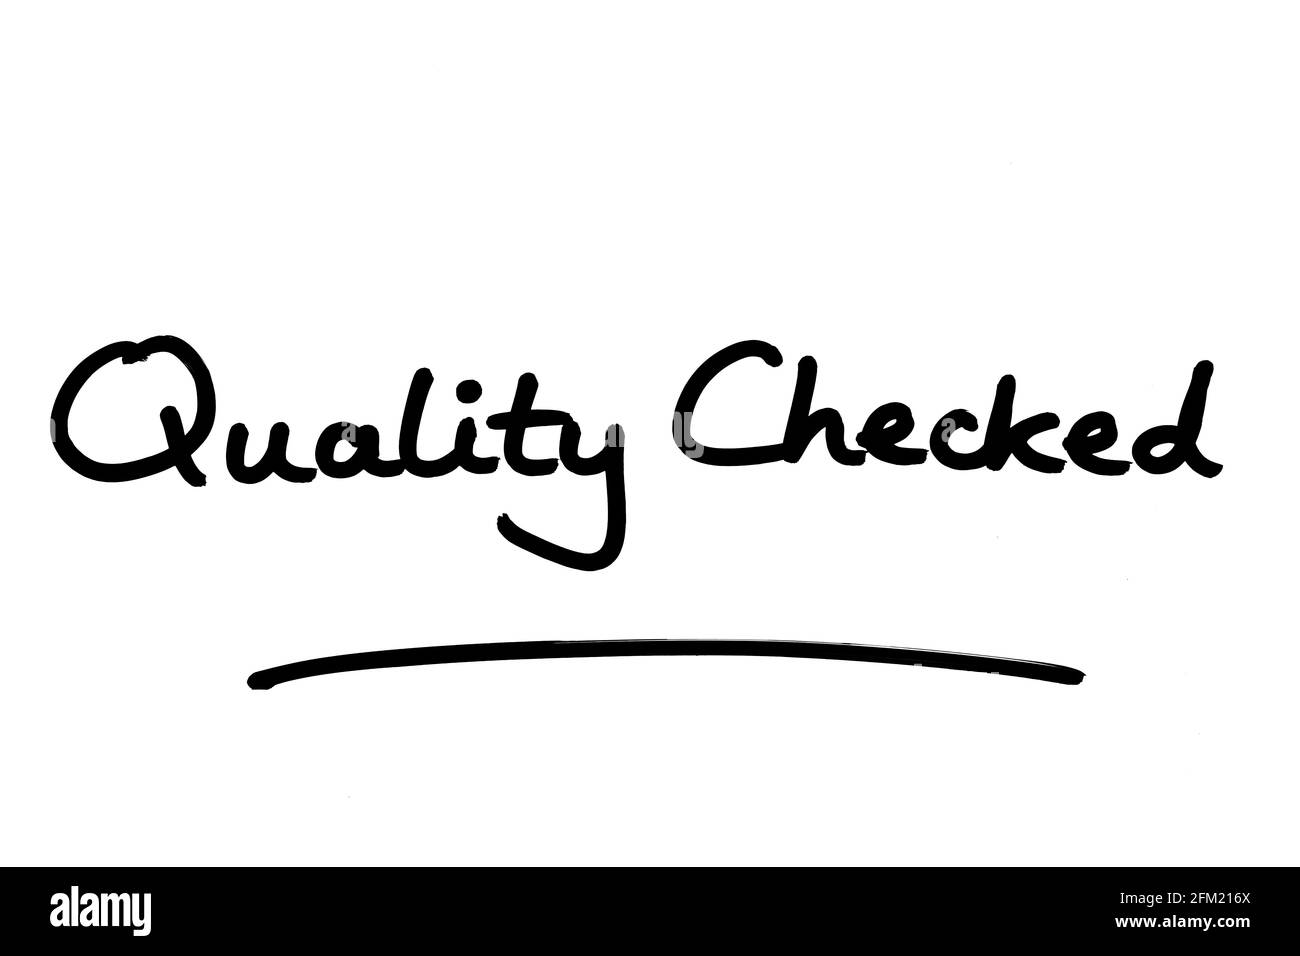 Quality Checked, handwritten on a white background. Stock Photo